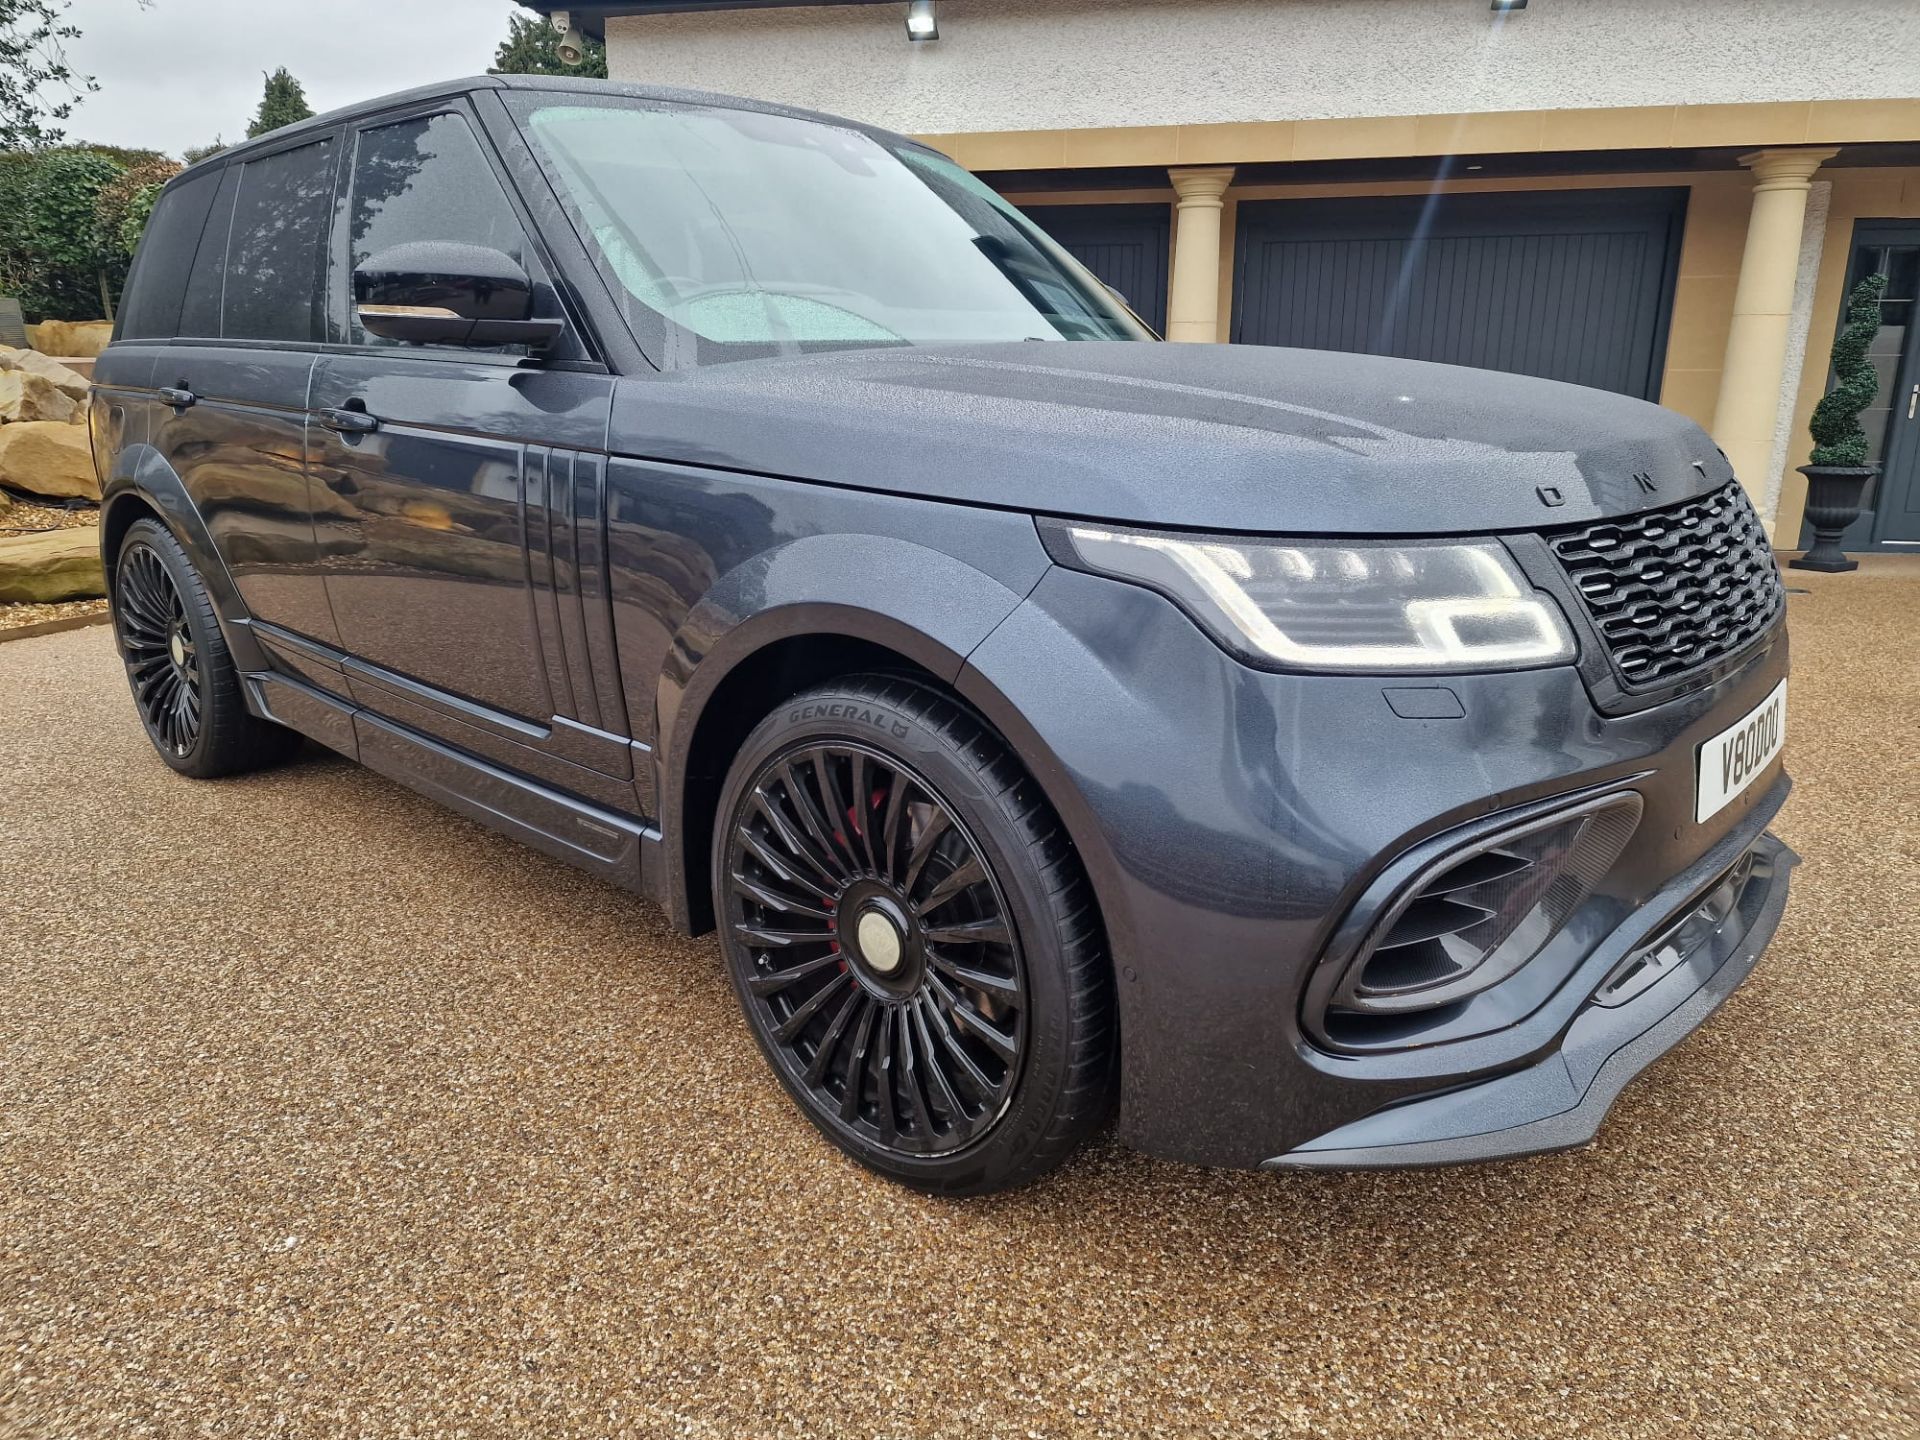 2018/68 RANGE ROVER SV AUTOBIOGRAPHY DYN V8 SC AUTO - £40K WORTH OF ONYX BODY KIT AND CONVERSION - Image 2 of 77